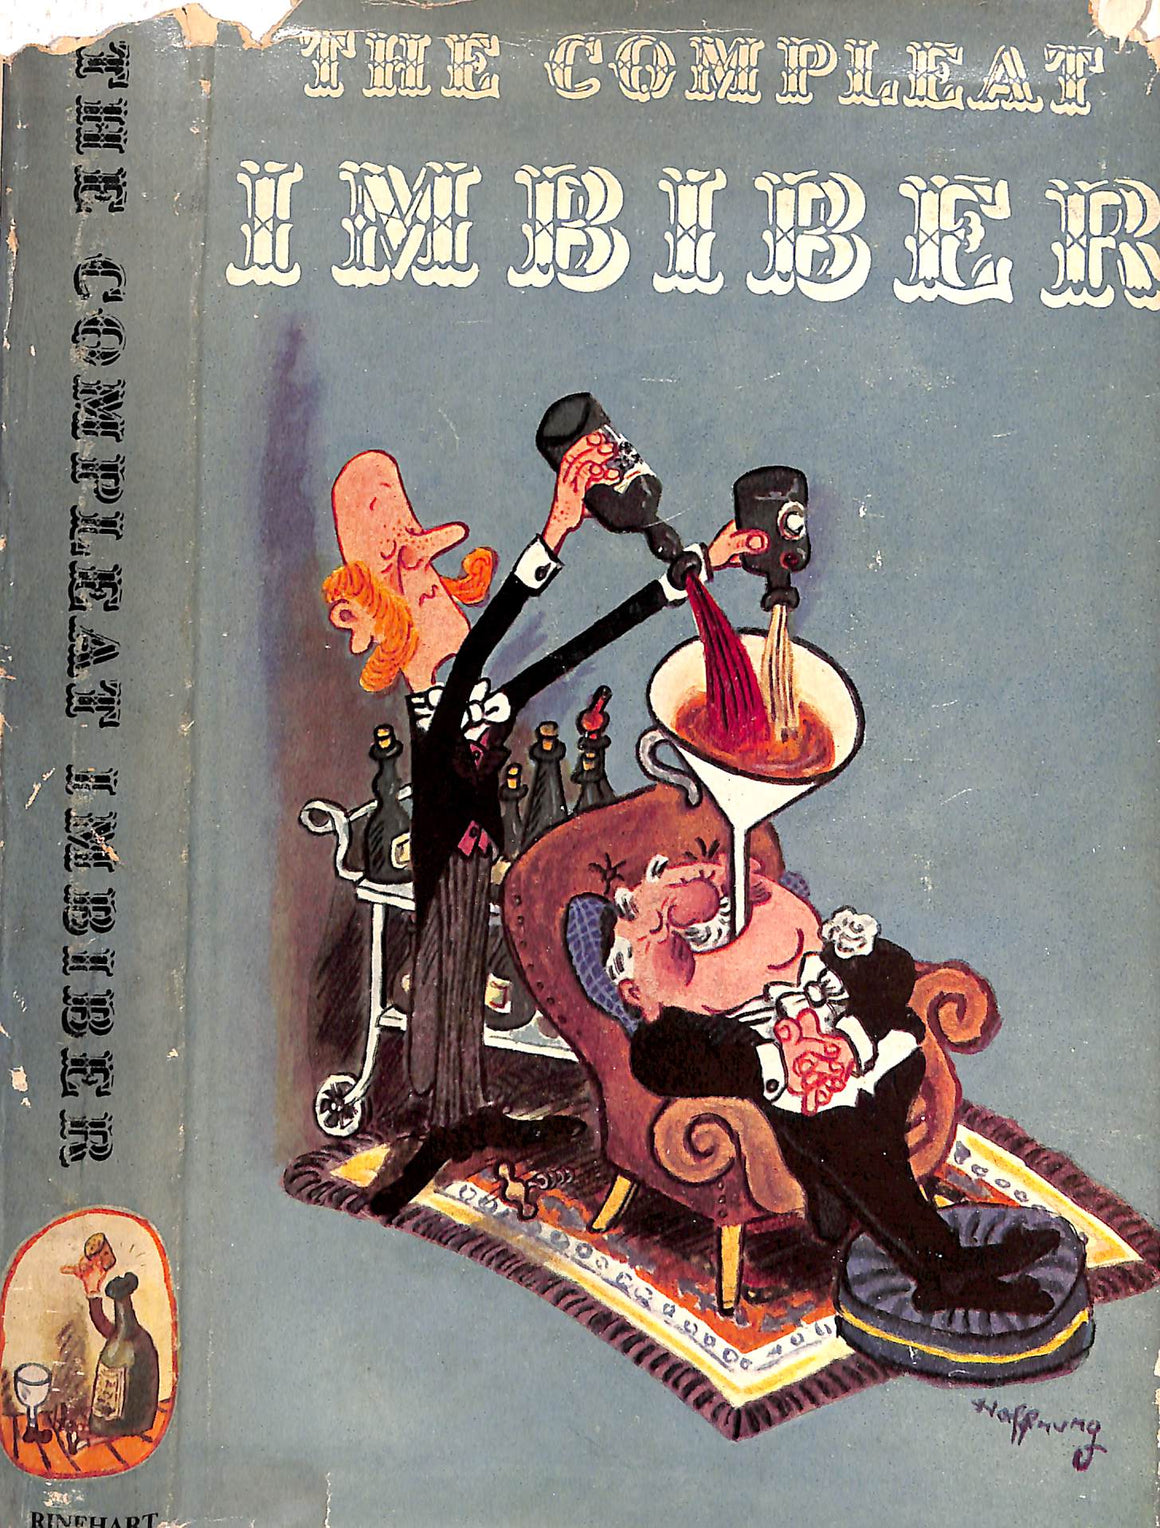 "The Compleat Imbiber: An Entertainment" 1957 RAY, Cyril [edited by]